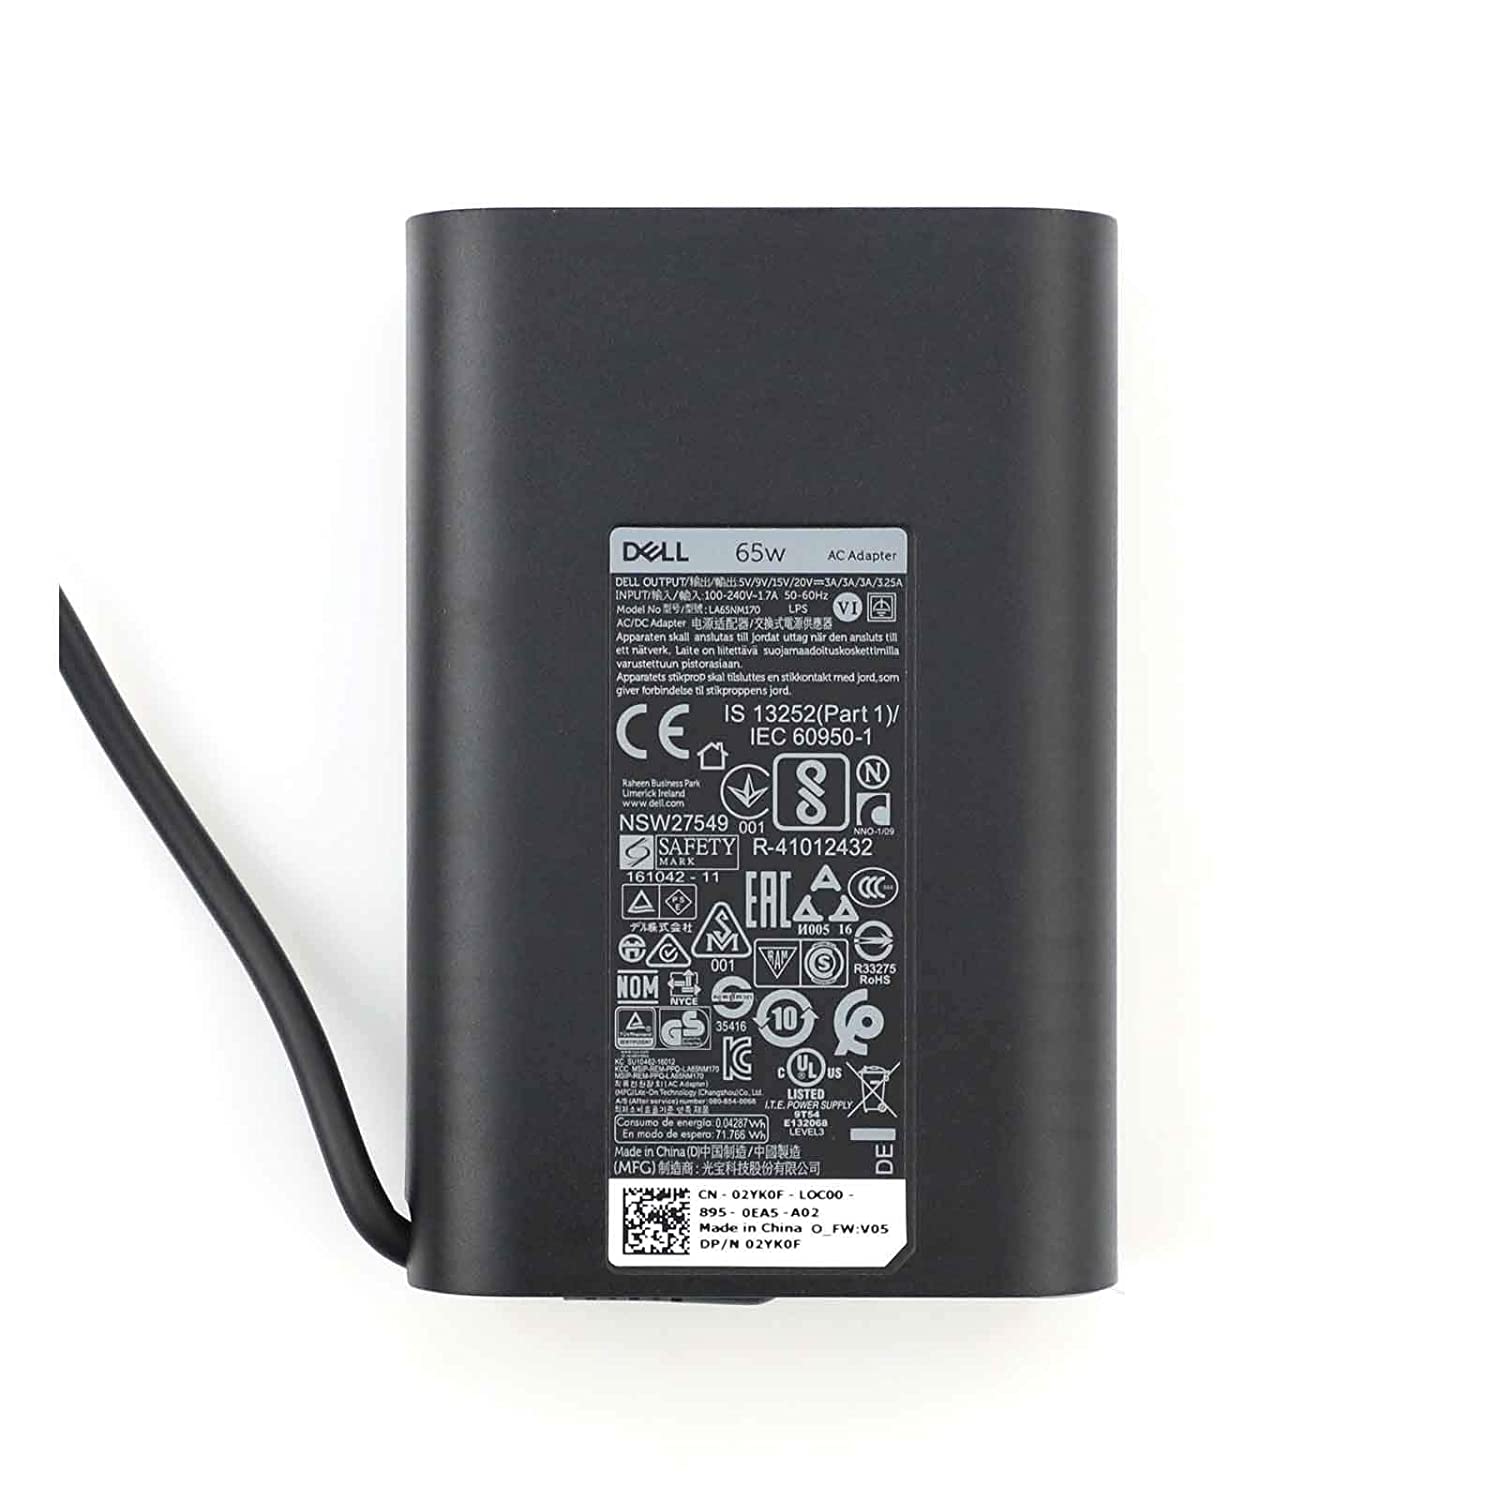 New Dell Laptop Charger 65W(Watt) AC Power Adapter With Type c(USB-C/USBC) Tip Include Power Cord For XPS 12, 9250 XPS 13 9350 9360 9365 9370 9380, Latitude 7370 7280 7480 5480 7275 5290 7490 - image 4 of 6